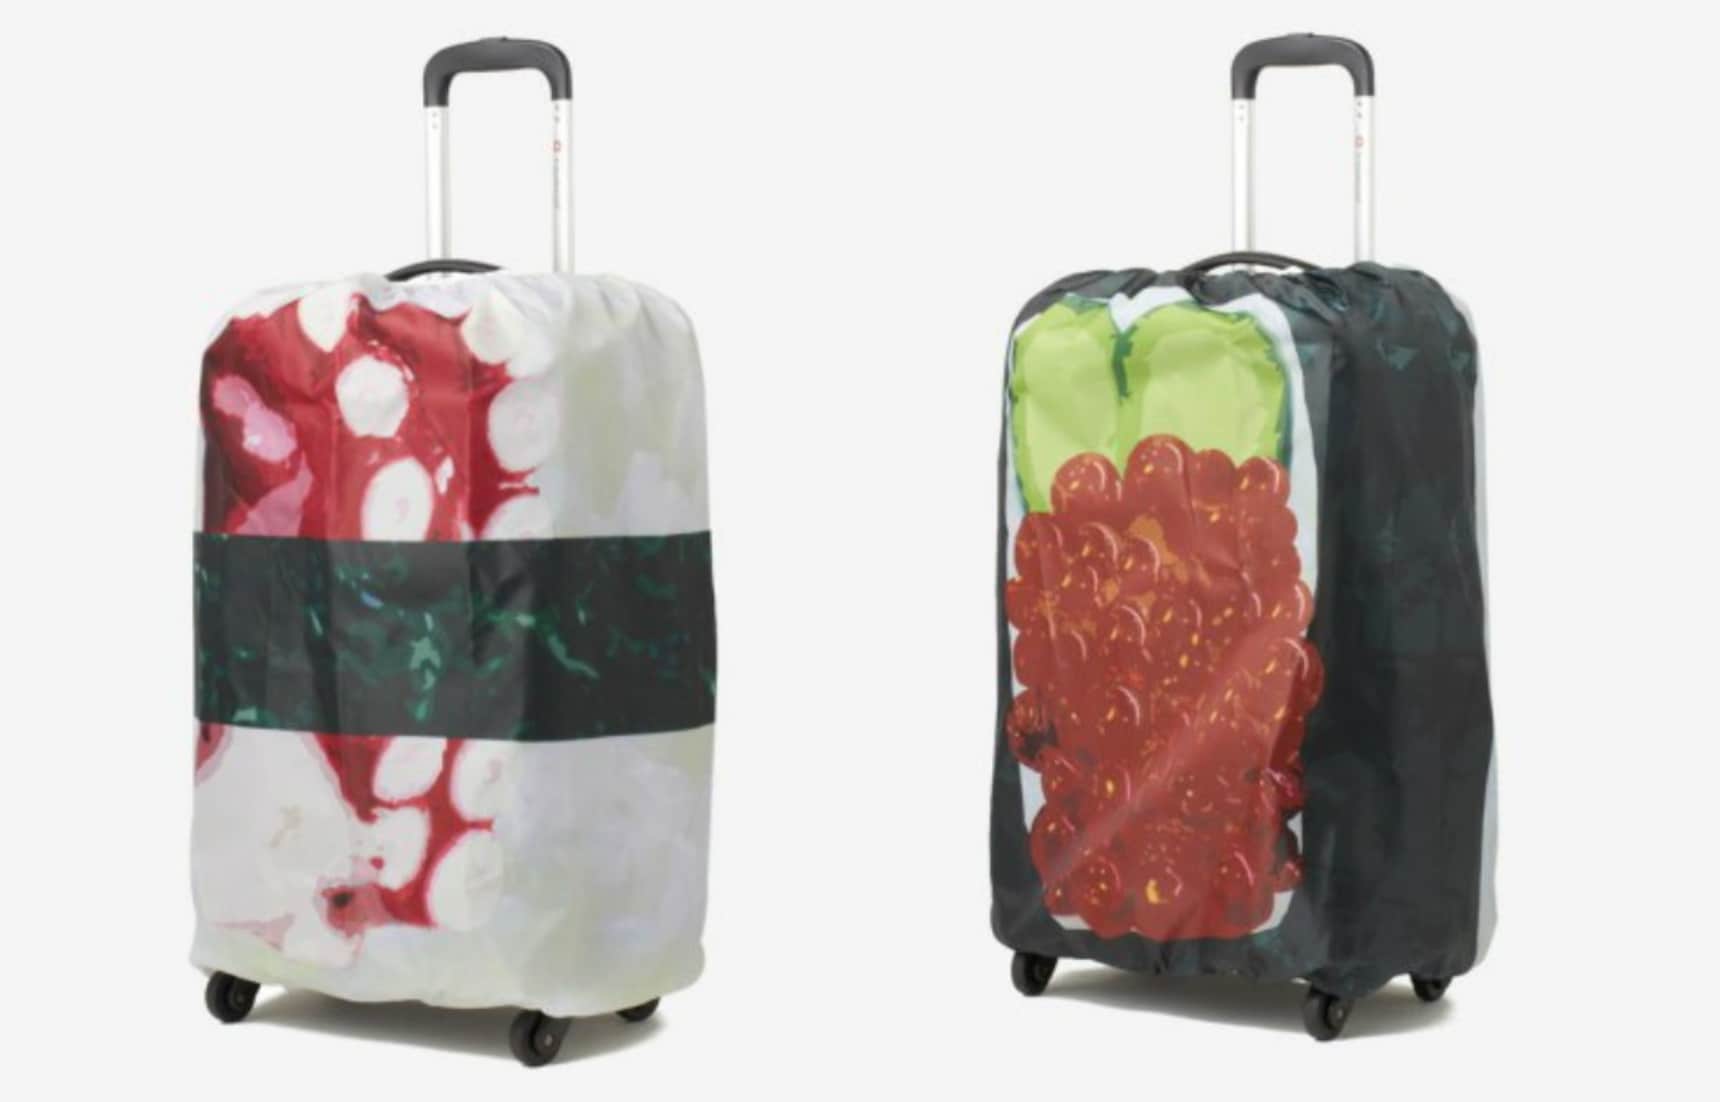 More Sushi Suitcase Covers!